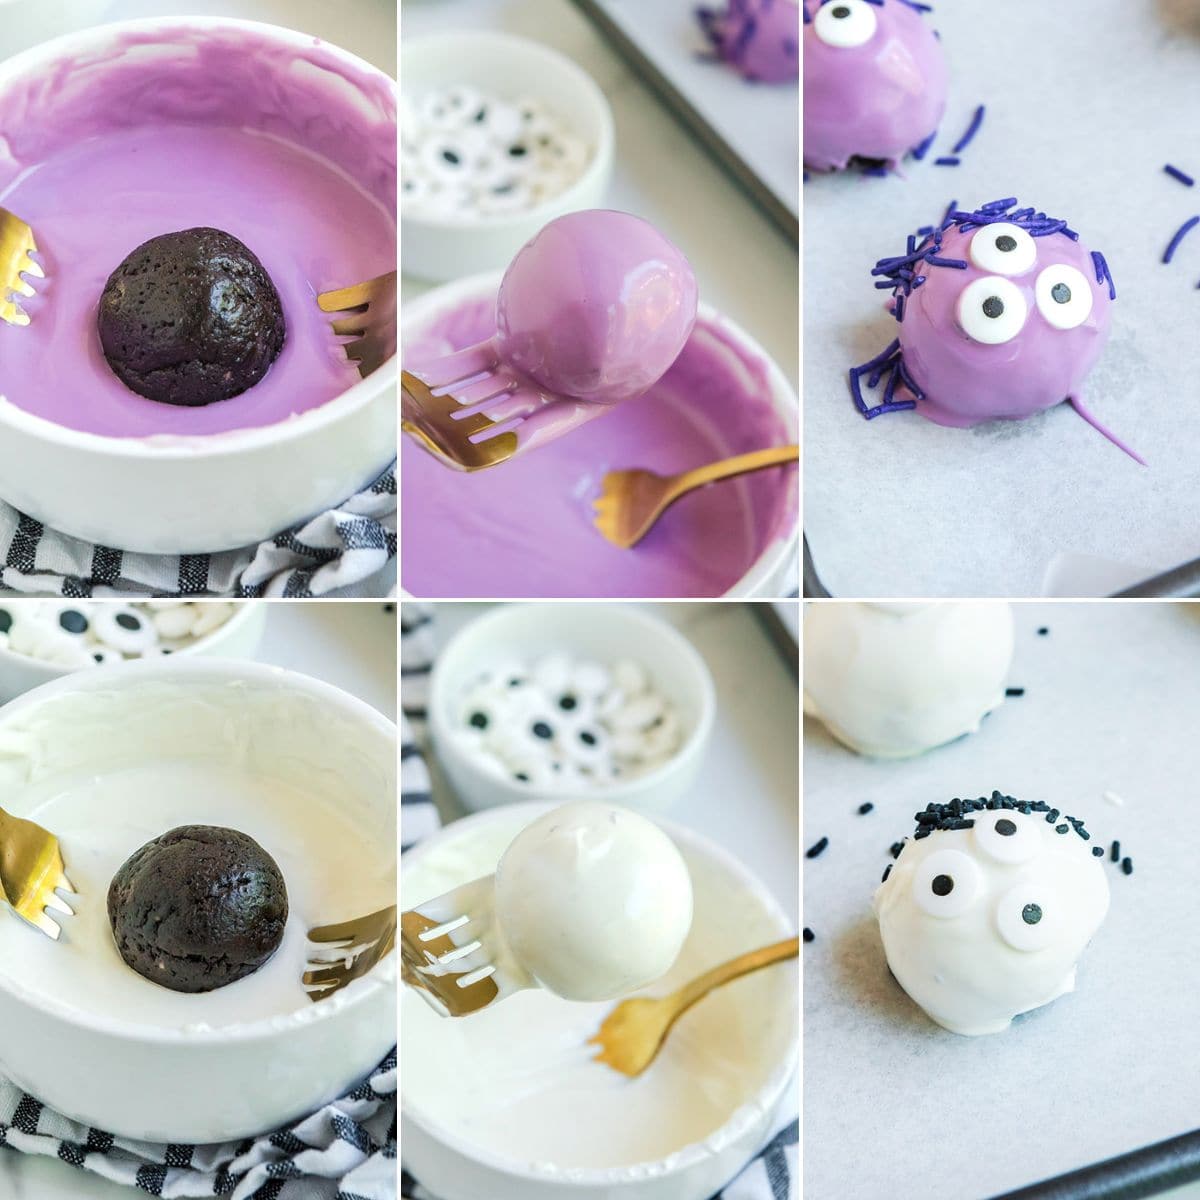 dipping the oreo balls into white and purple candy melts. decorating with sprinkles and candy eyes.